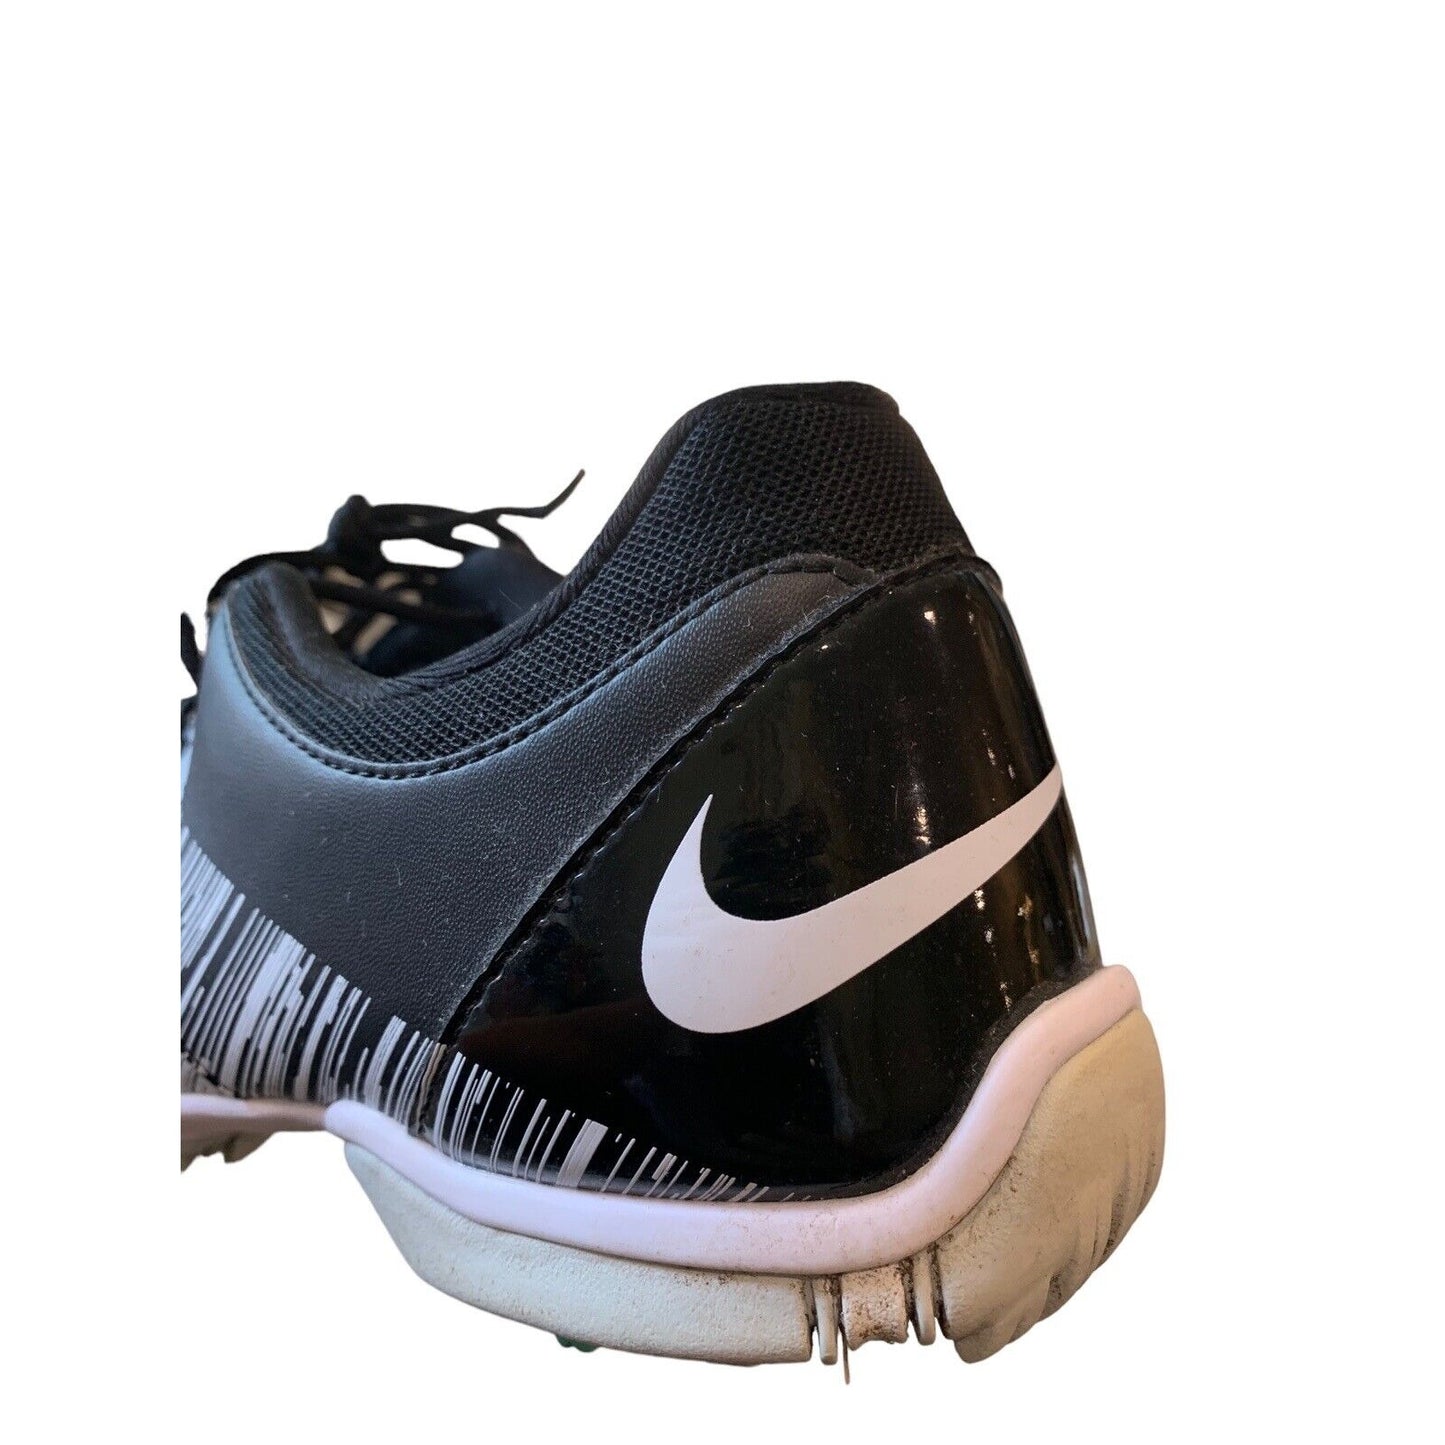 Heel View Of Black And White Women's Golf TAC Shoe